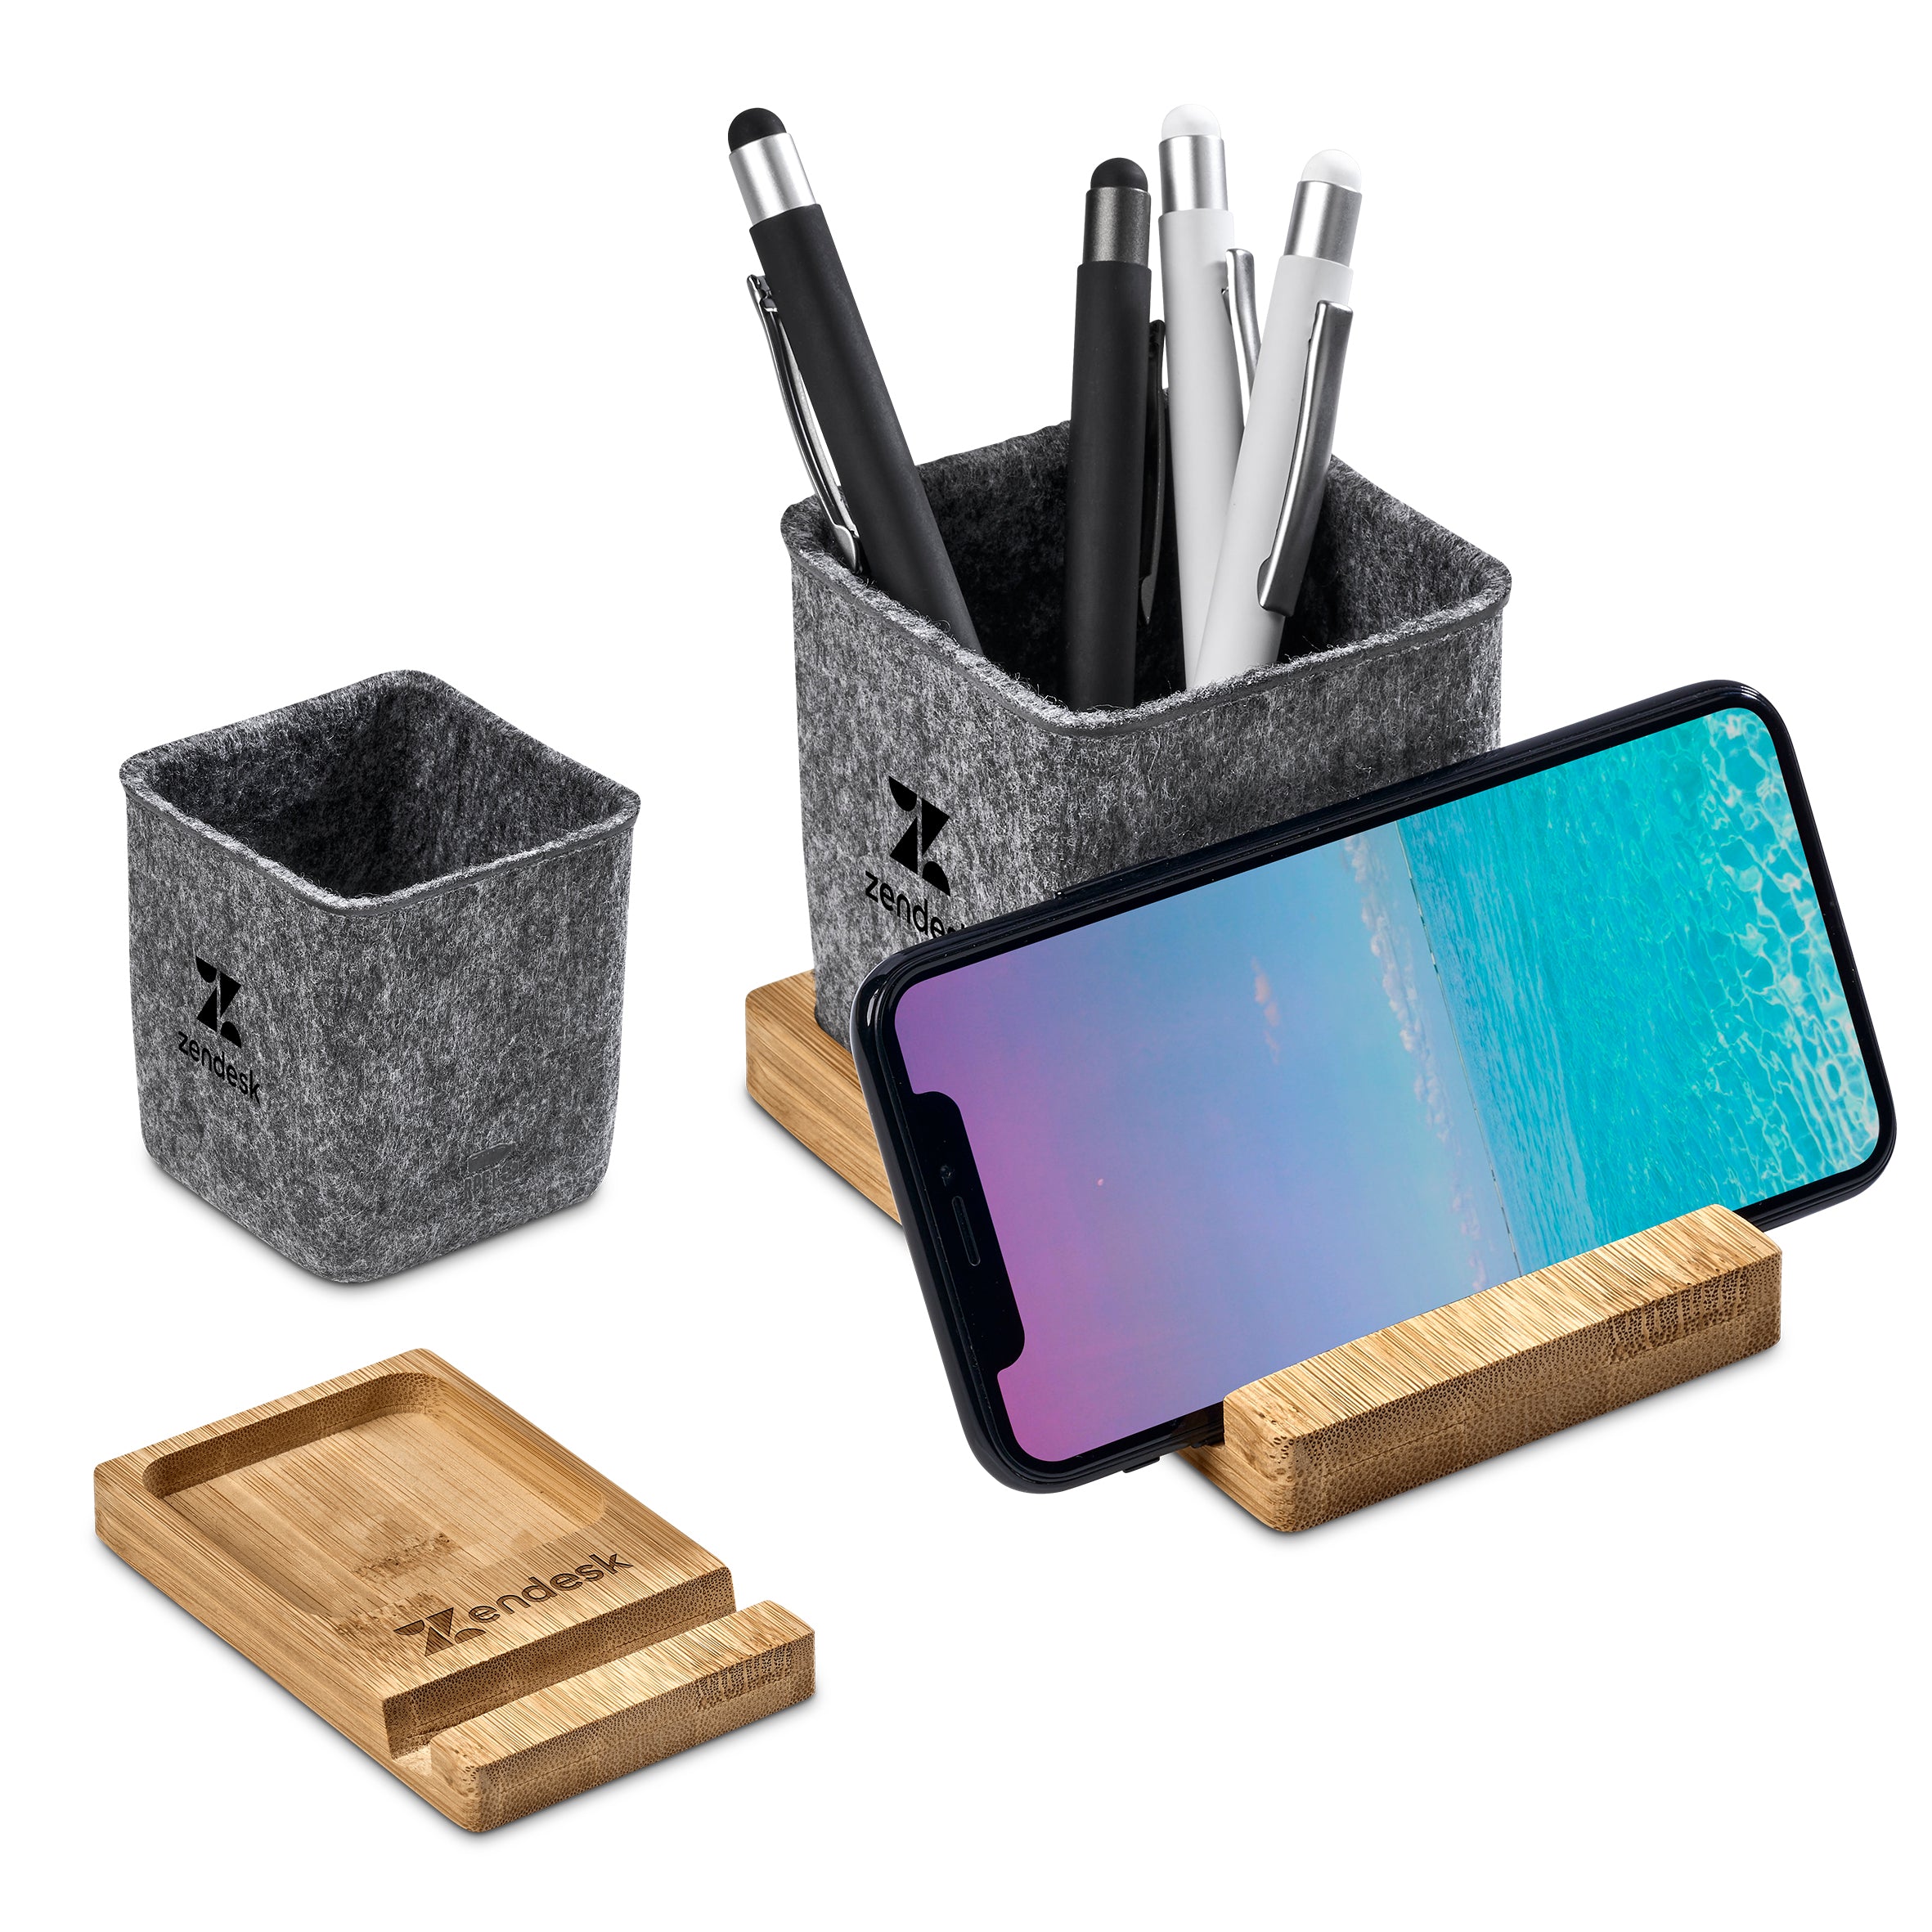 Kyadi Recycled PET & Bamboo Desk Caddy Phone Stand